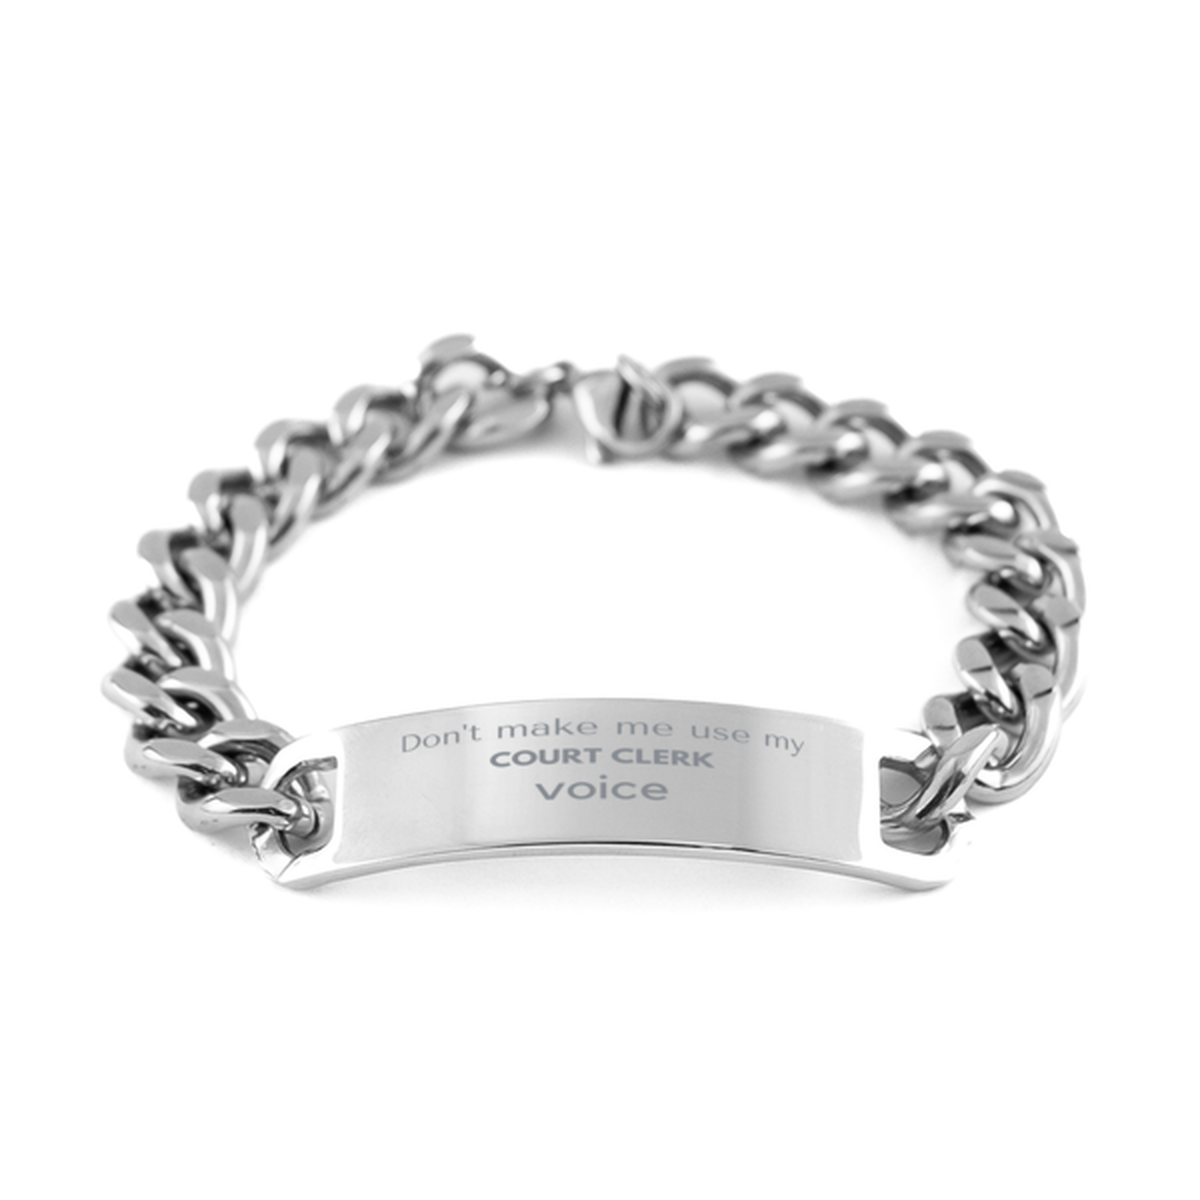 Don't make me use my Court Clerk voice, Sarcasm Court Clerk Gifts, Christmas Court Clerk Cuban Chain Stainless Steel Bracelet Birthday Unique Gifts For Court Clerk Coworkers, Men, Women, Colleague, Friends